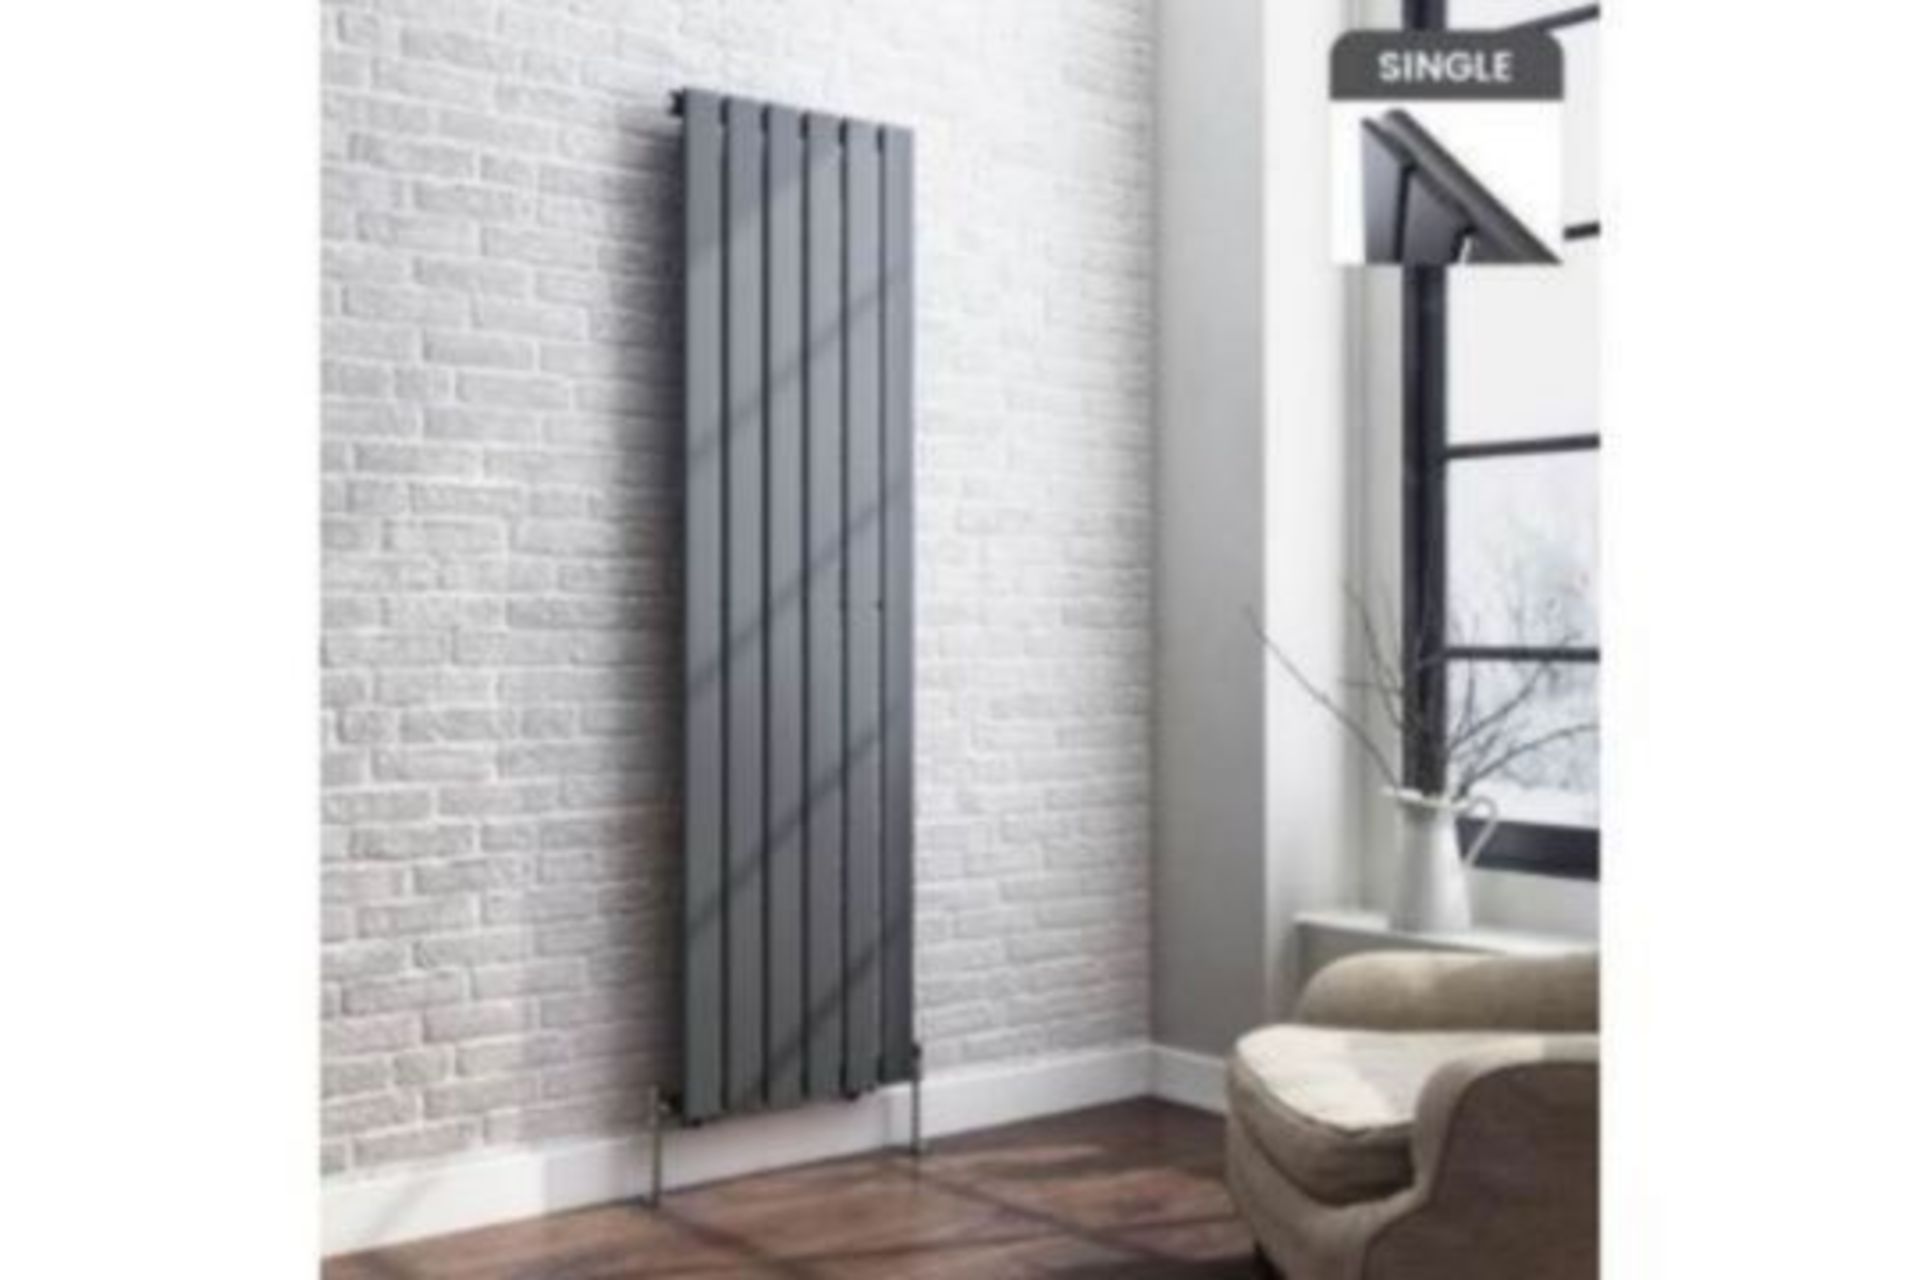 New & Boxed 1600x452mm Anthracite Single Flat Panel Vertical Radiator.Rc209.RRP £307.99 Each.